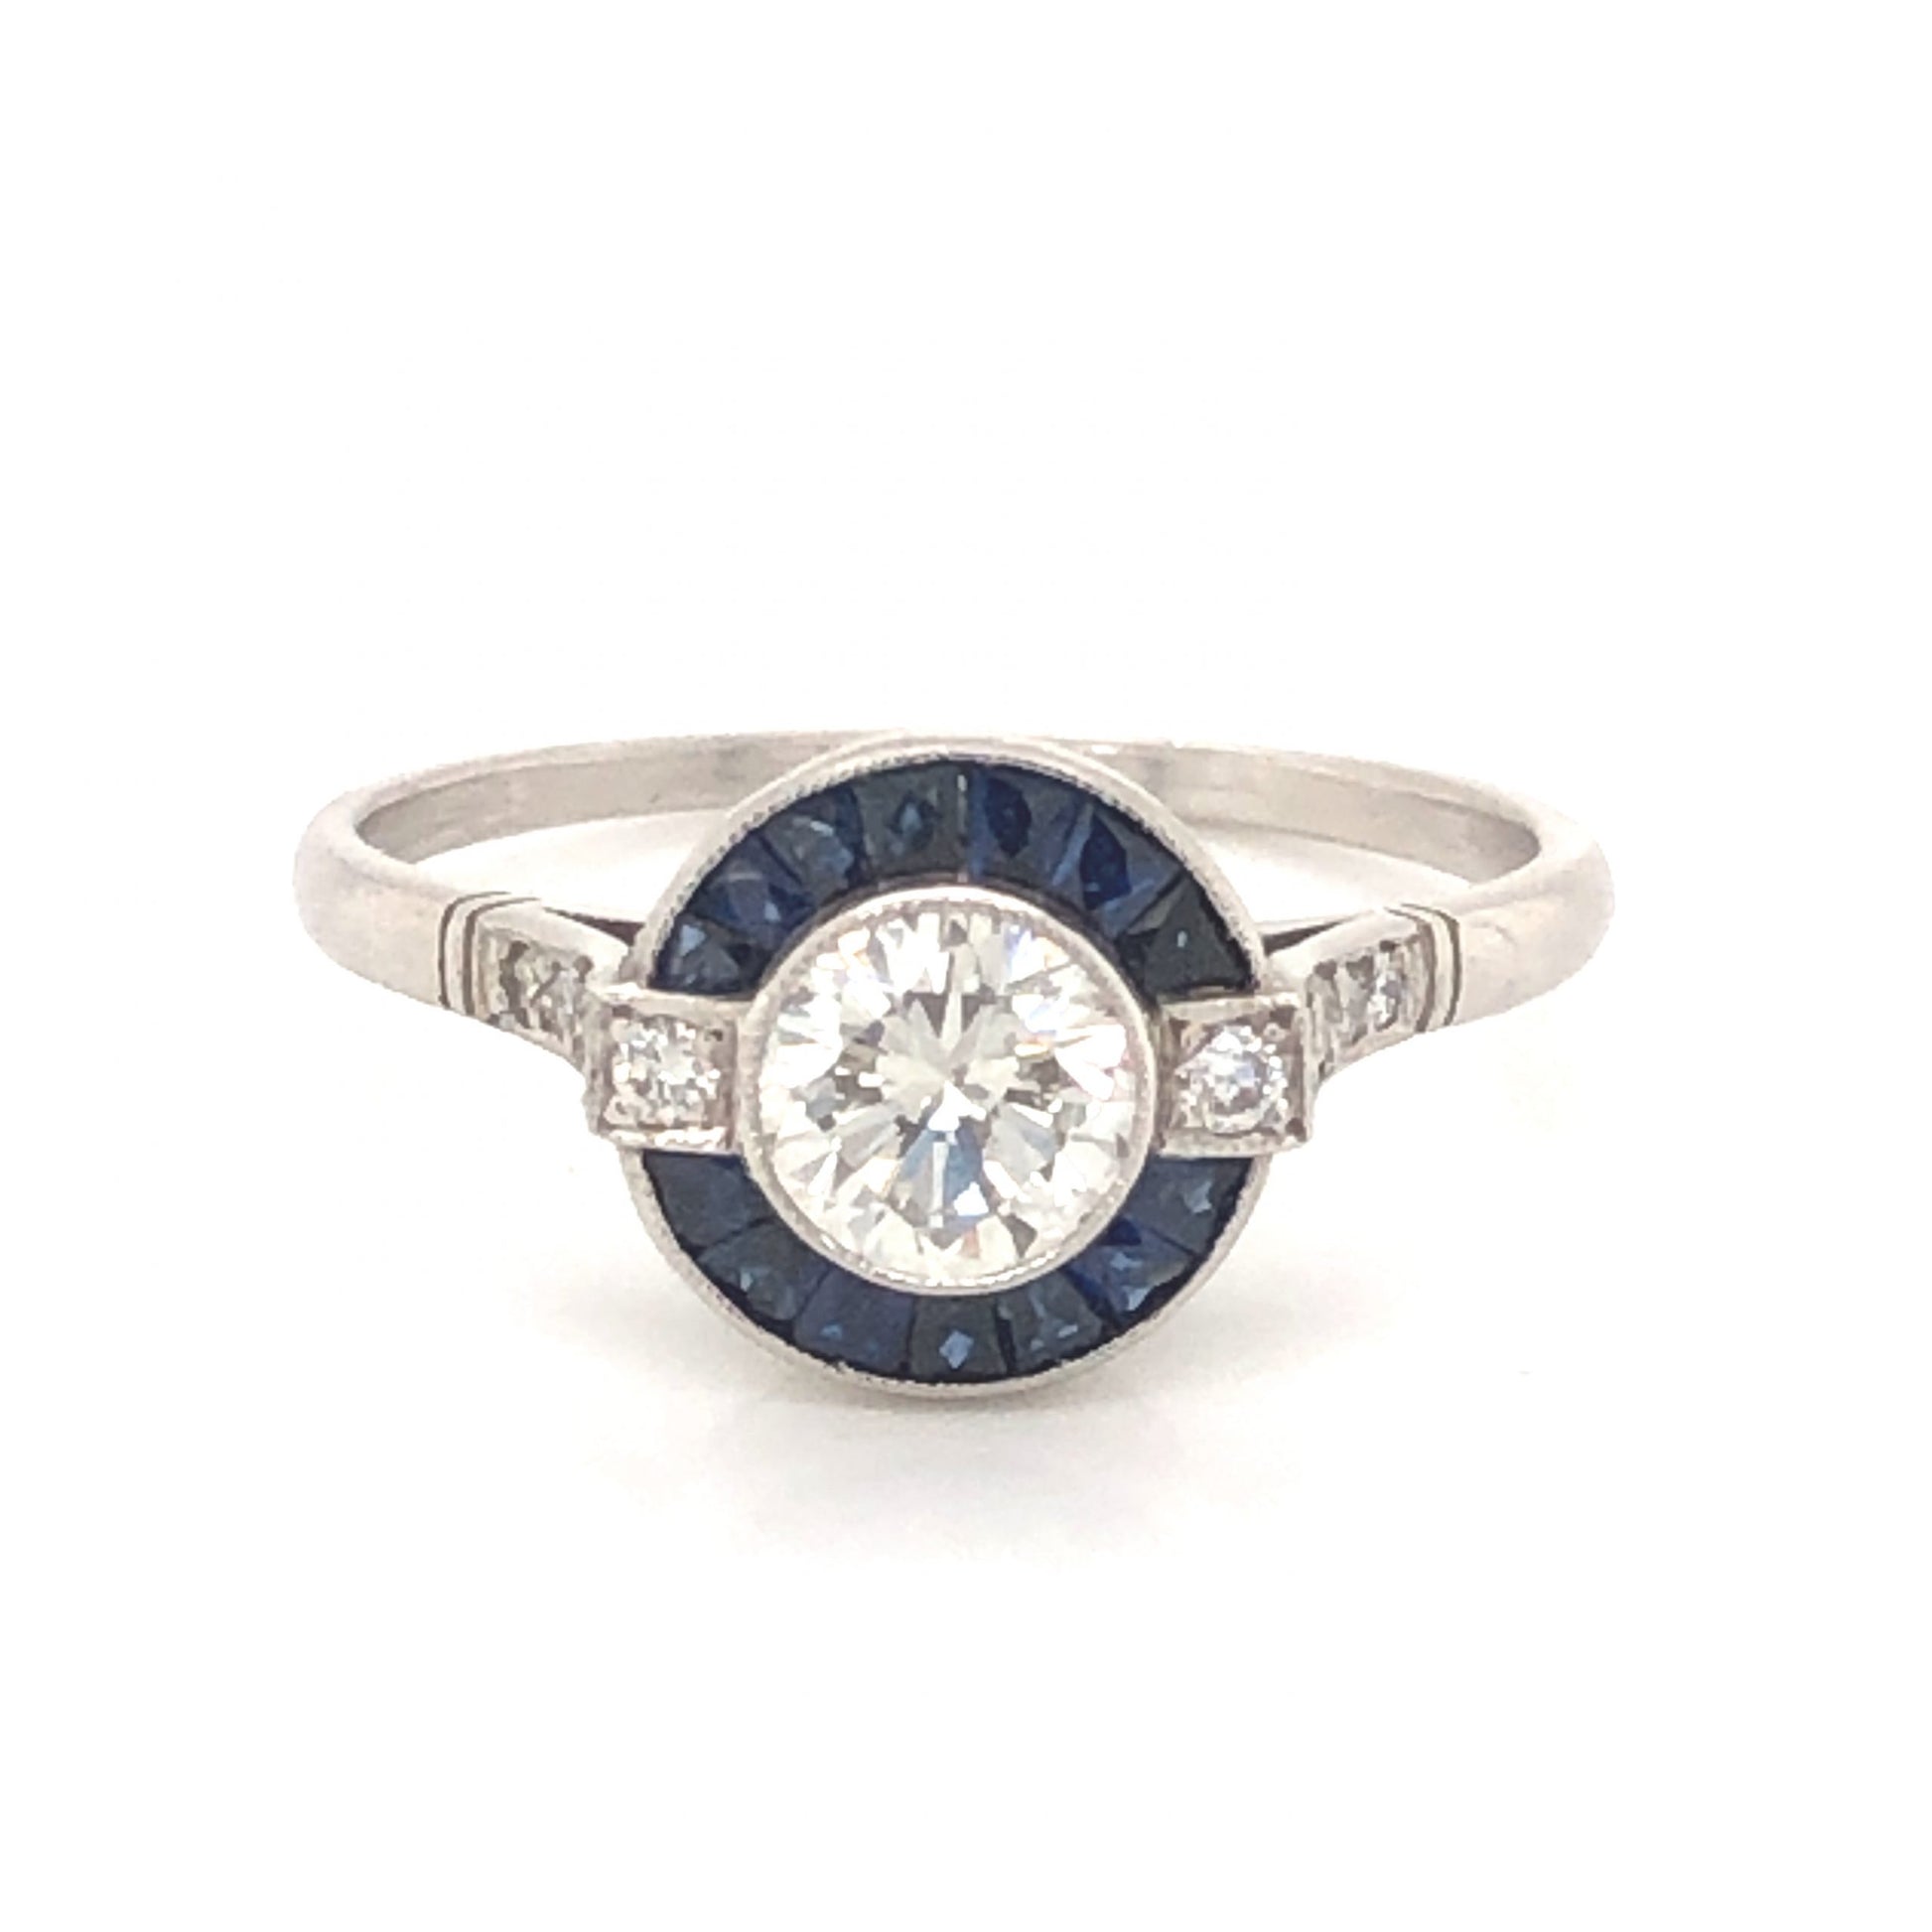 .53 Round Brilliant Cut Diamond & Sapphire Ring in PlatinumComposition: PlatinumRing Size: 6.5Total Diamond Weight: .65 ctTotal Gram Weight: 3.3 gInscription: 0.53